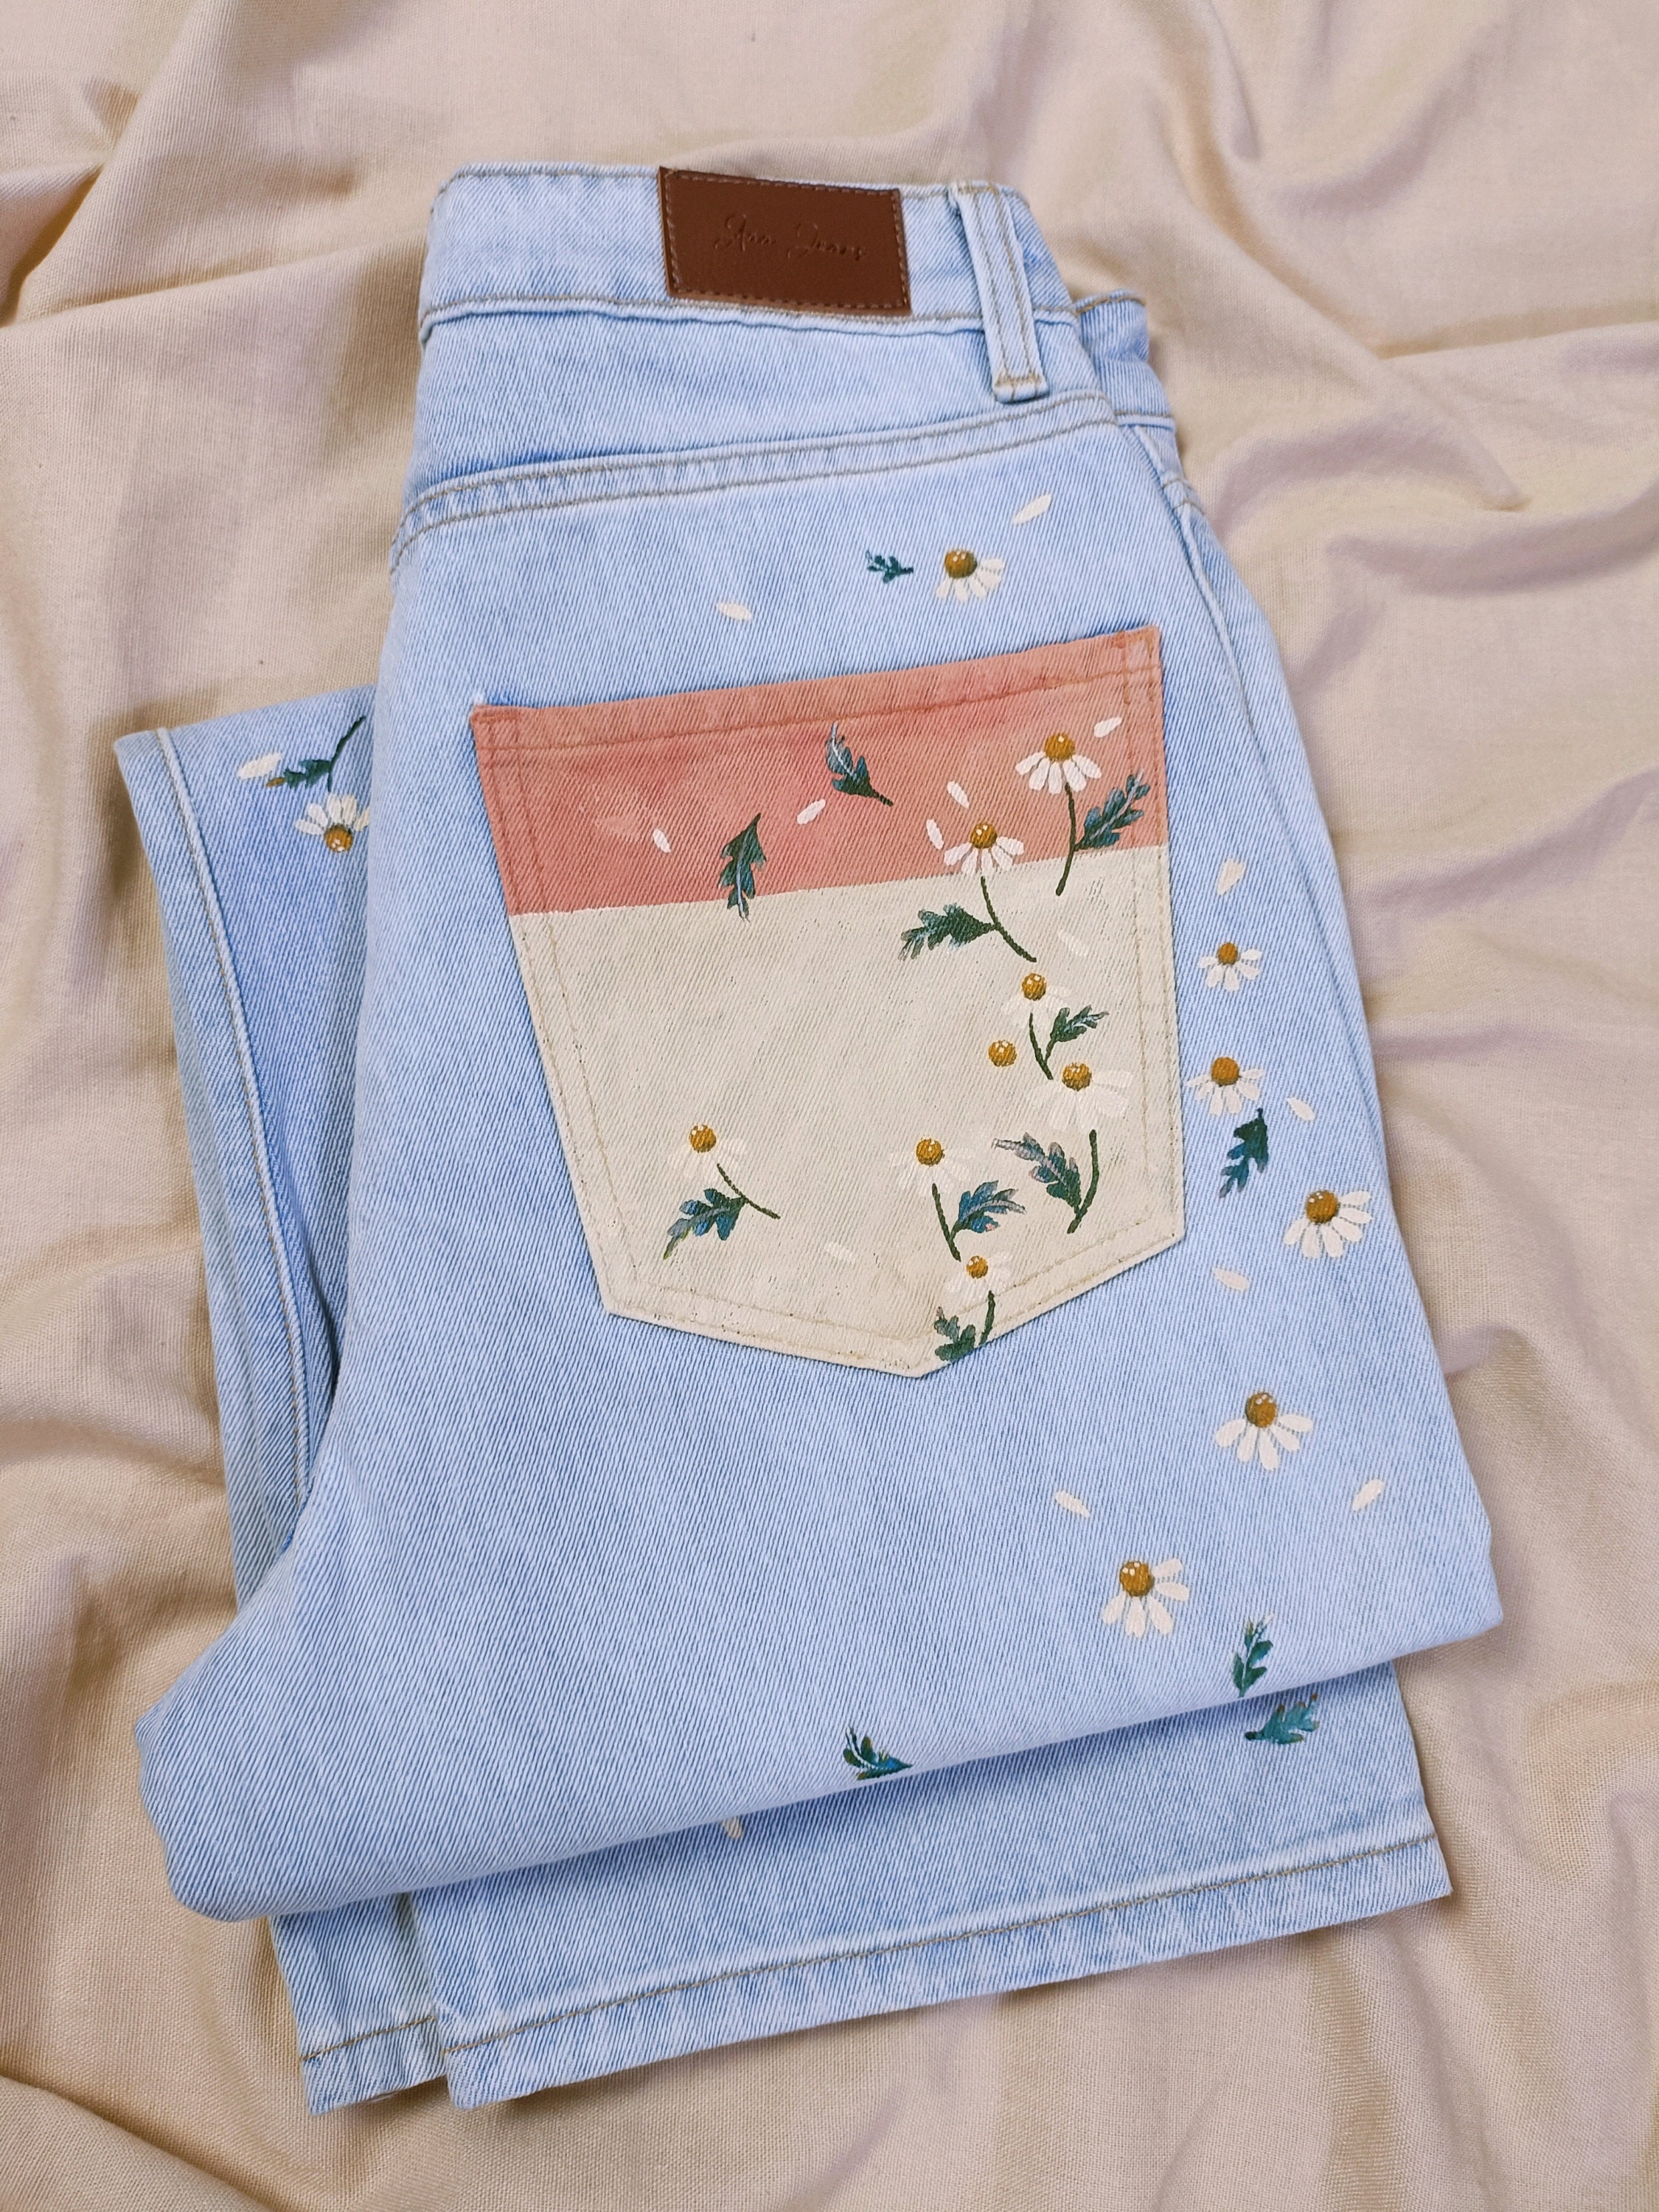 Custom Hand Painted Jeans Vintage High Waist With Ripped Knee Details  Original Design -  Canada